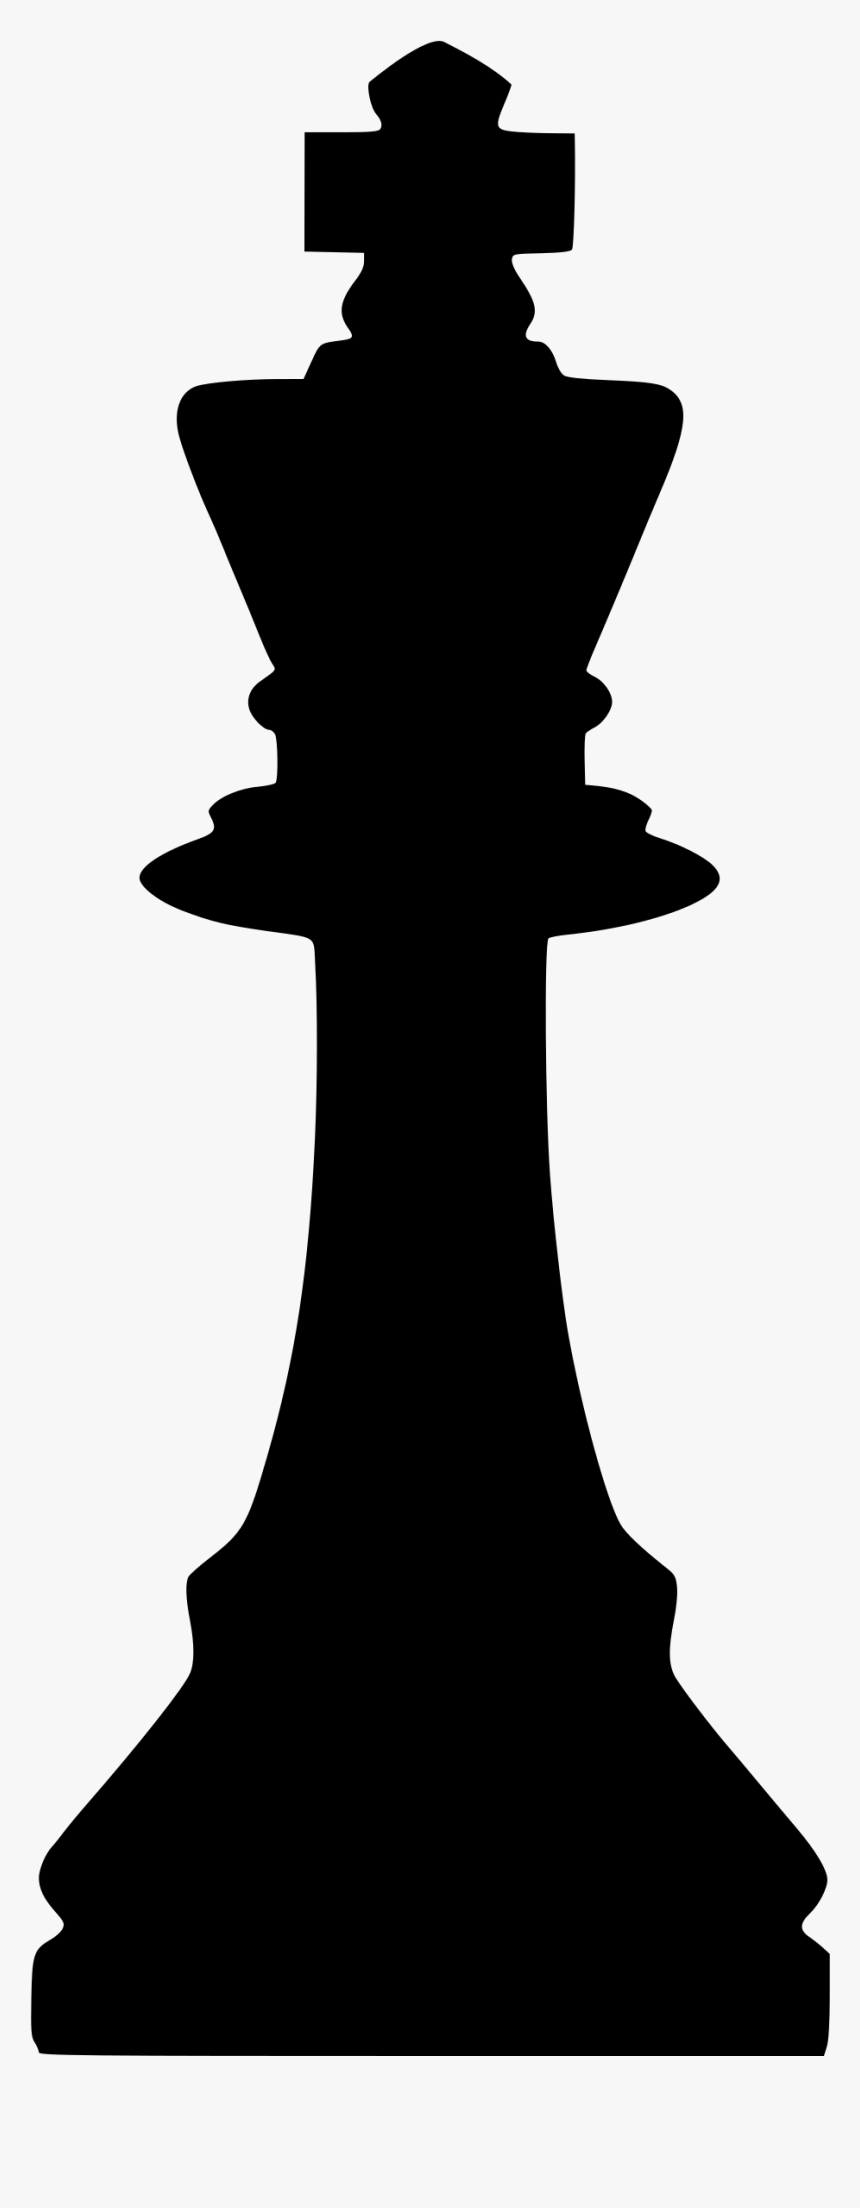 King Clipart Silhouette - King Chess Piece Silhouette, HD Png Download ...